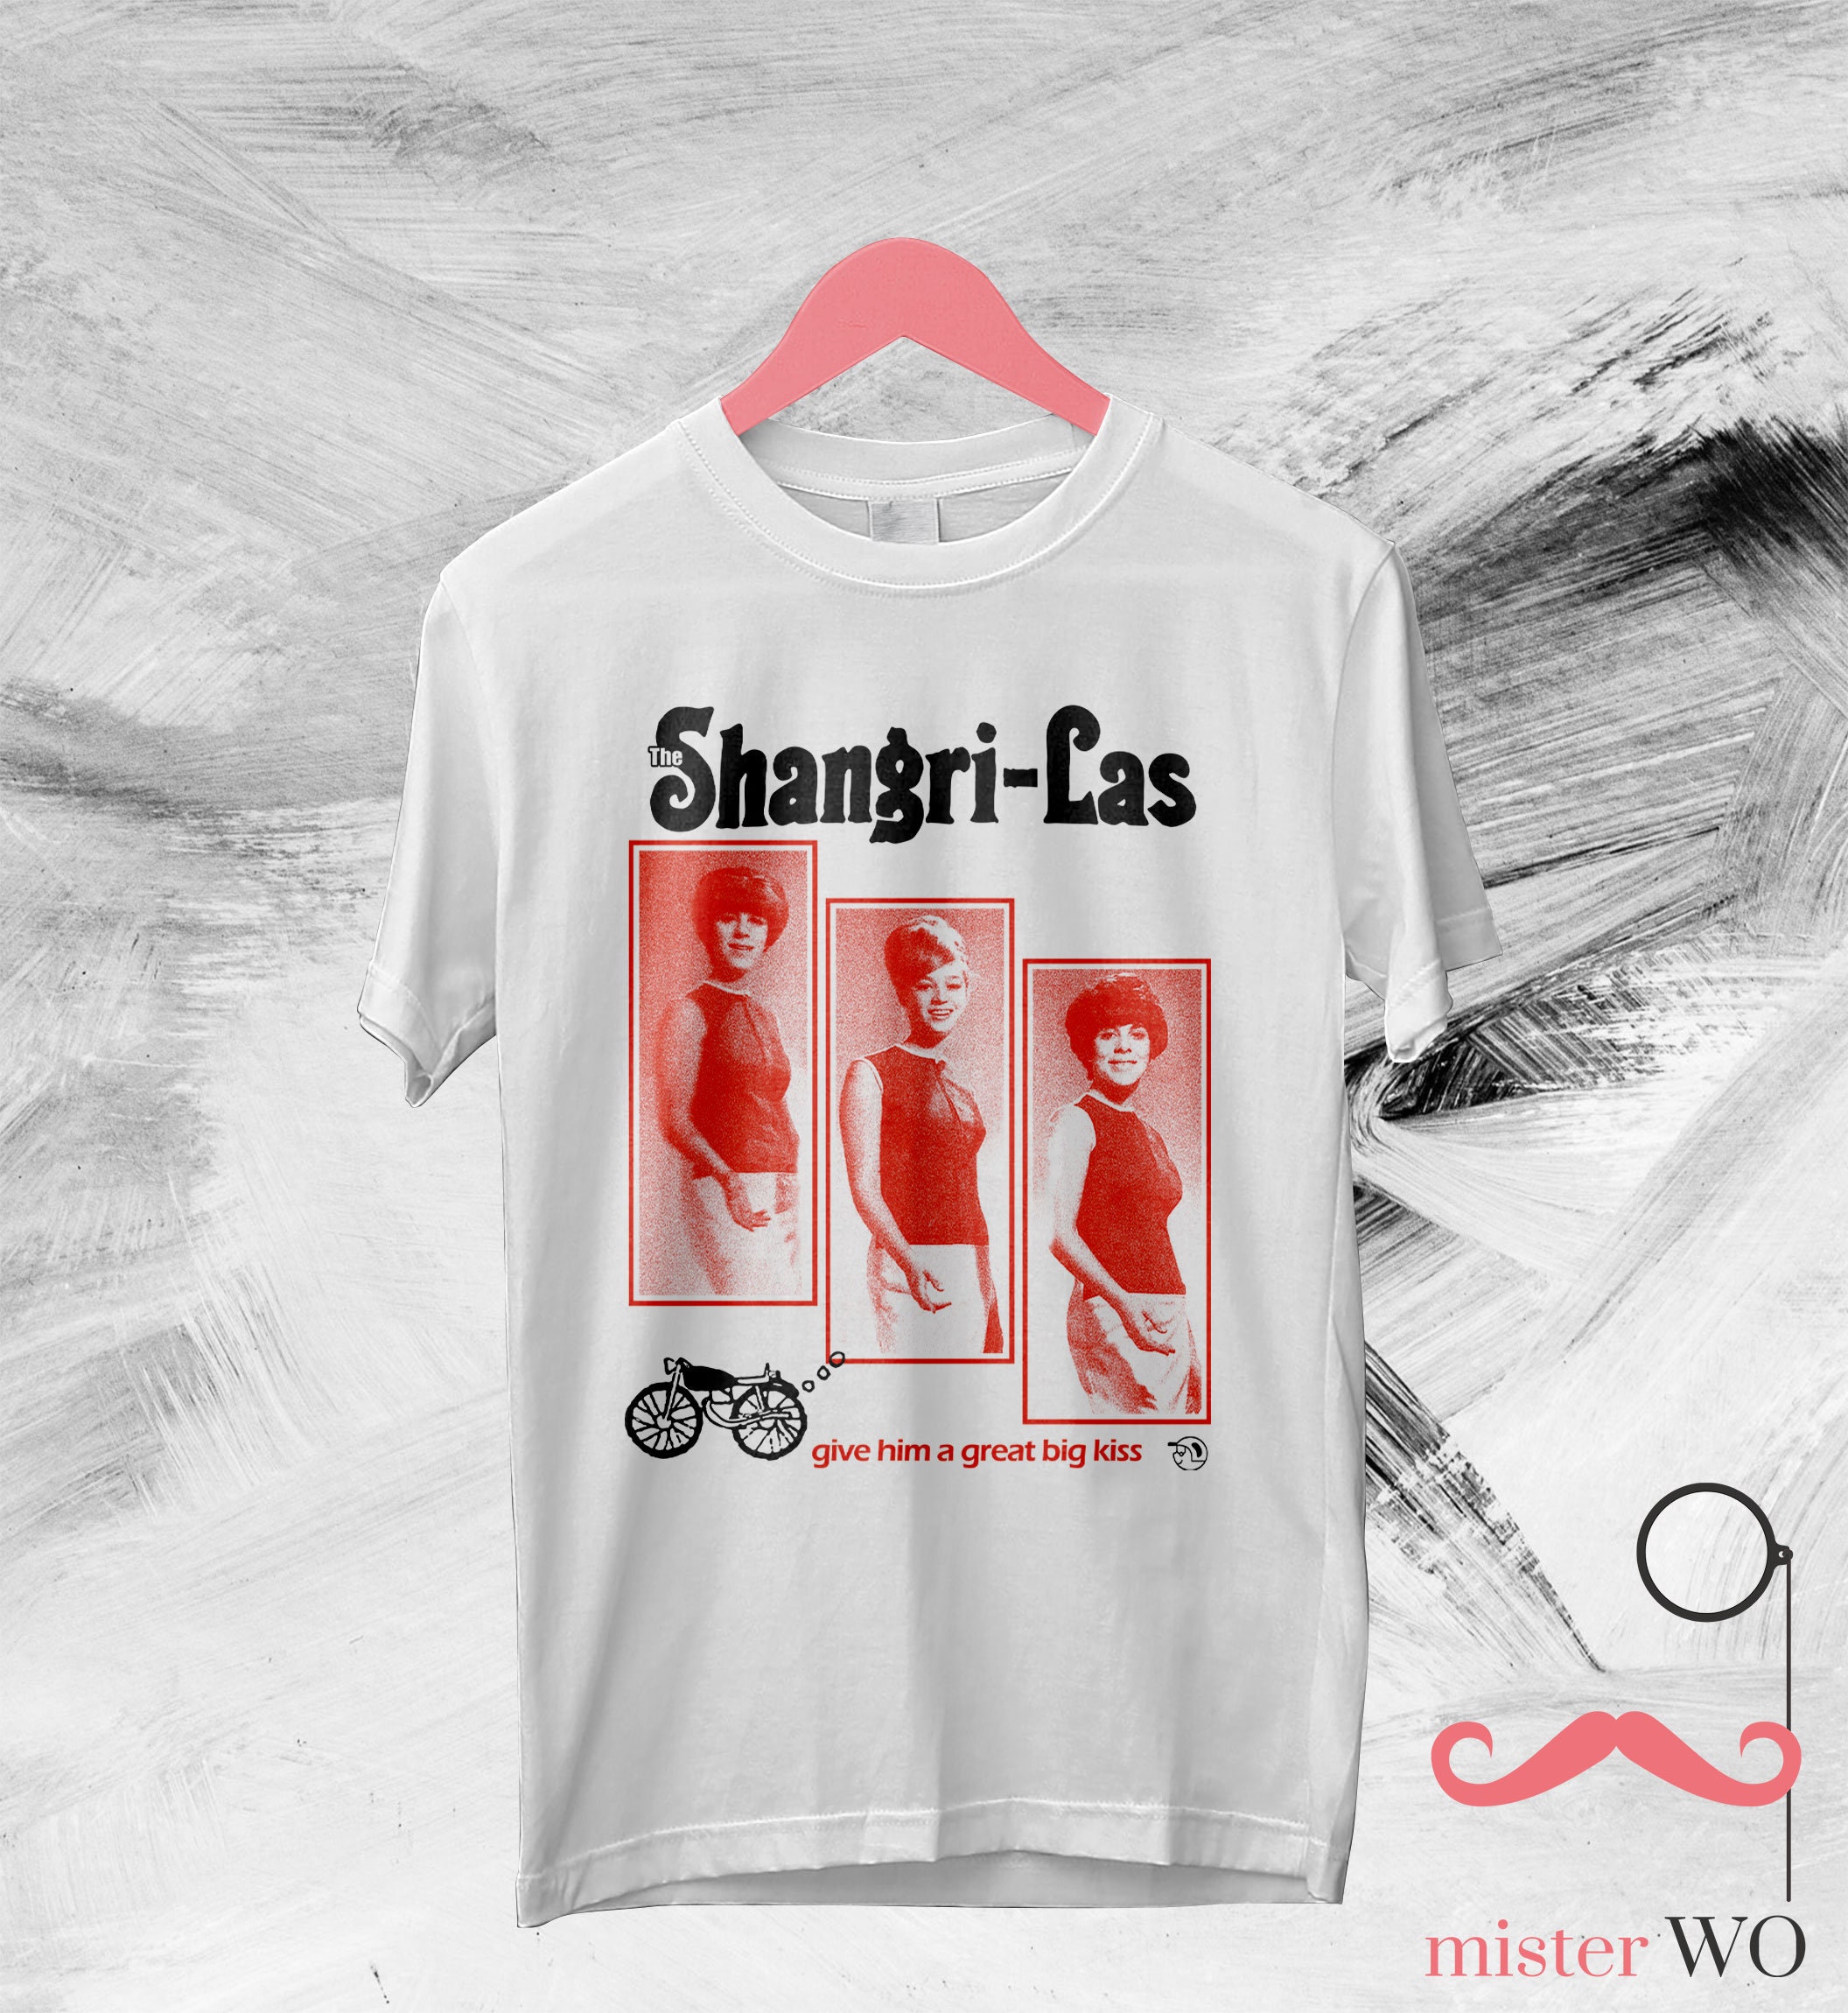 Discover The Shangri-Las Give Him a Great Big Kiss T-Shirt - The Shangri-Las Shirt, The Shangri-Las Tour, Music Shirt, Pop Goup Music